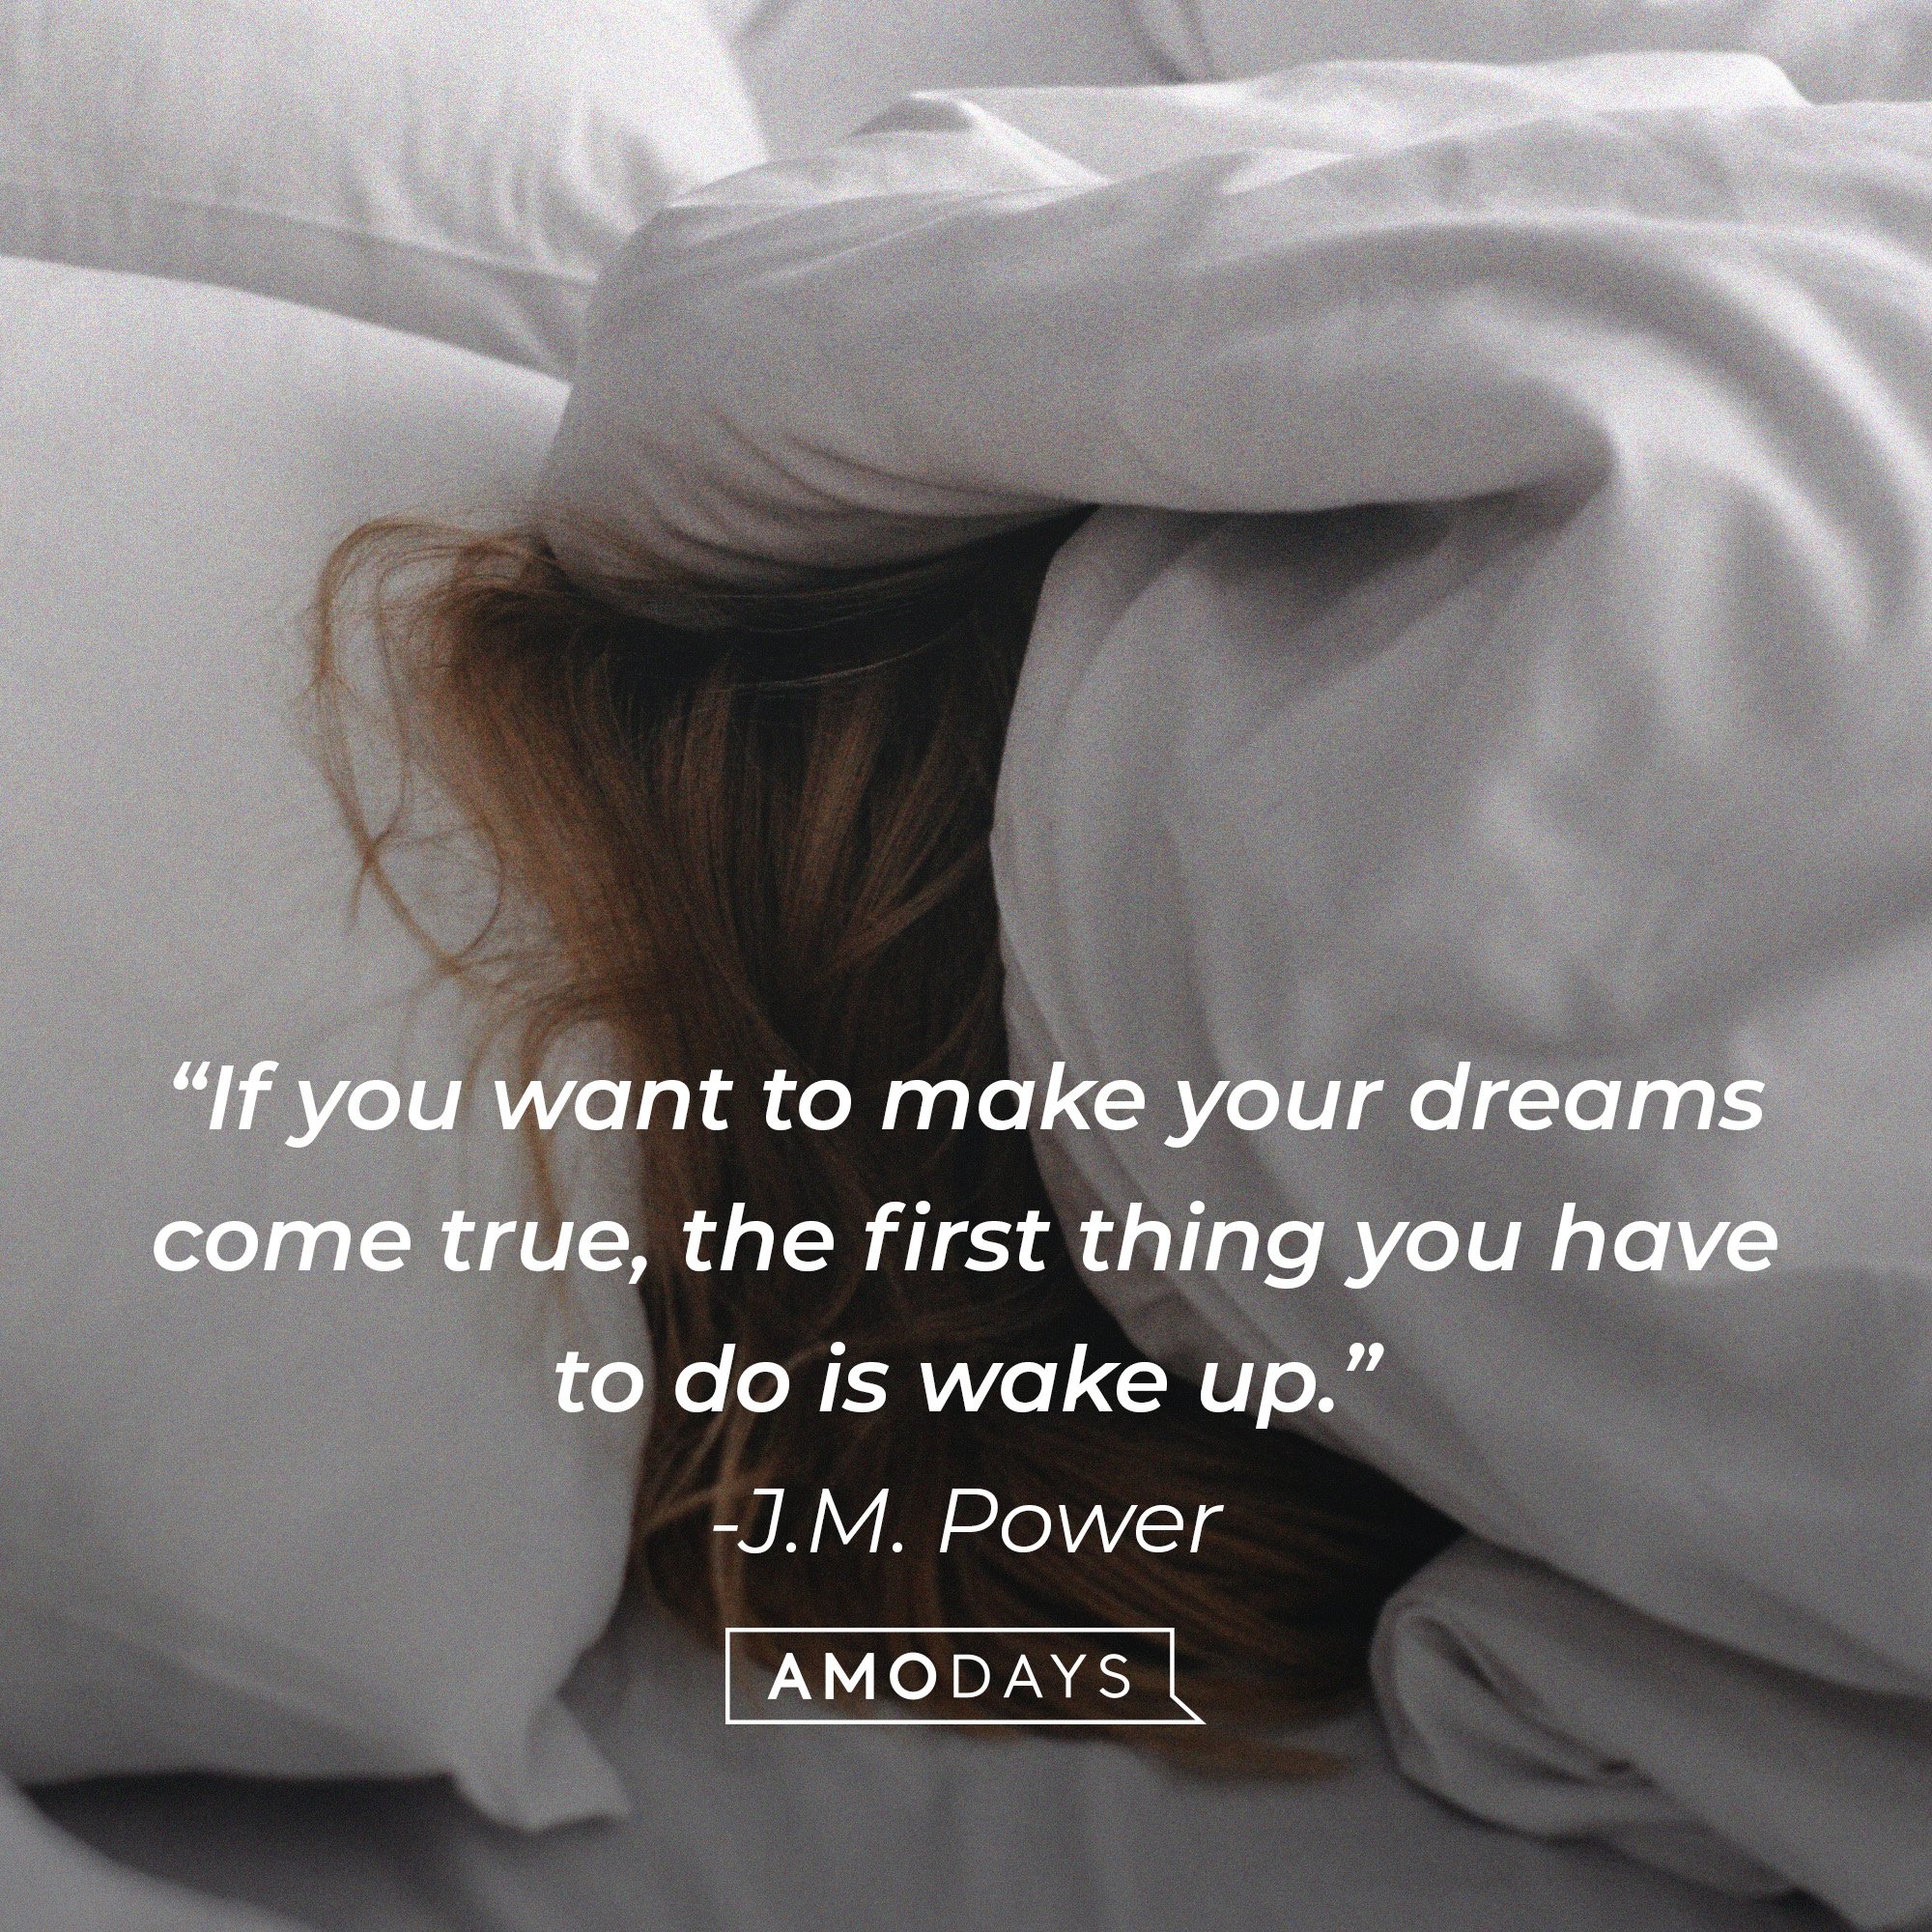 J.M. Power's quote: “If you want to make your dreams come true, the first thing you have to do is wake up.” | Image: AmoDays 